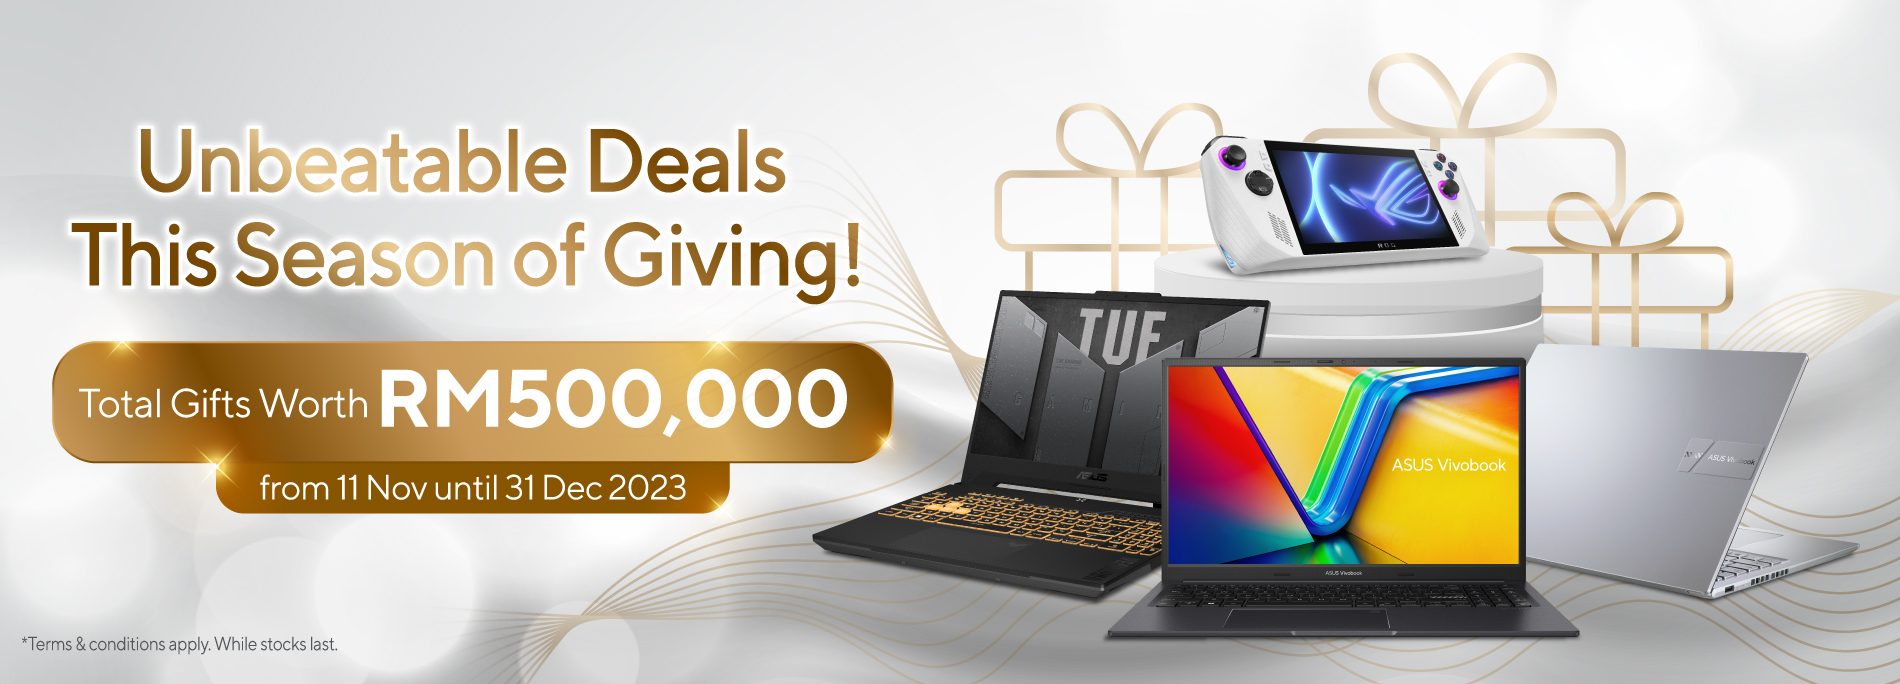 Unbeatable Deals - This Season of Giving!